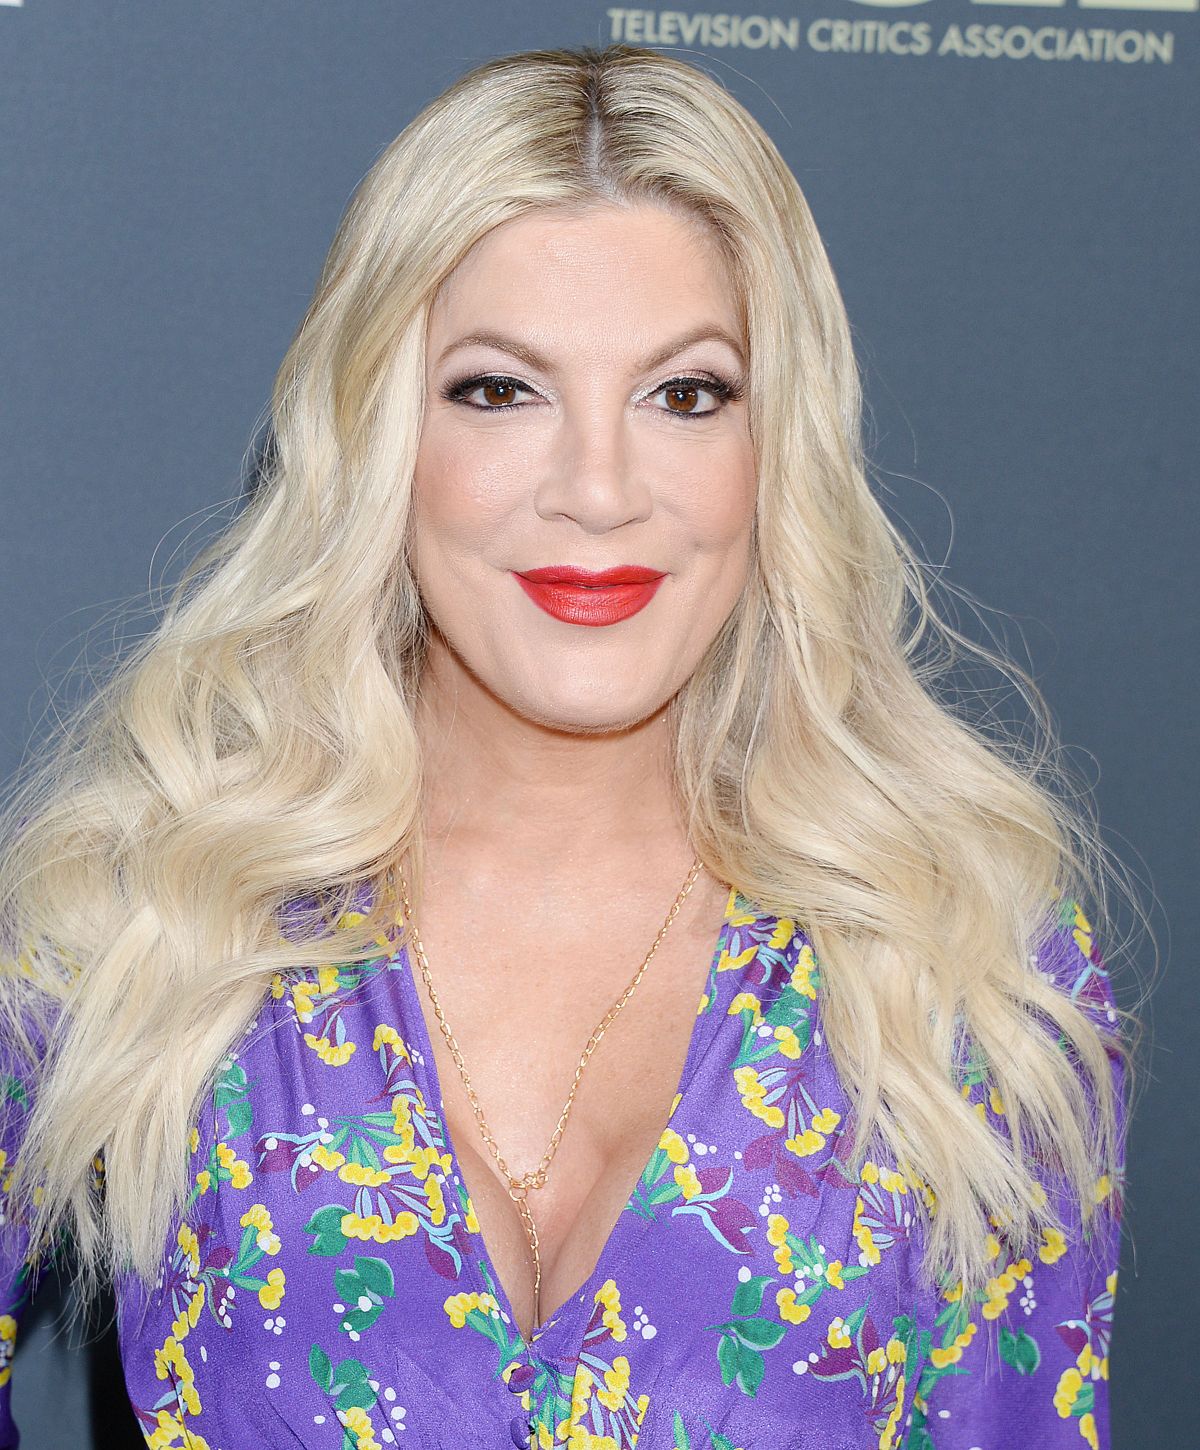 List 100+ Images recent pictures of tori spelling Latest